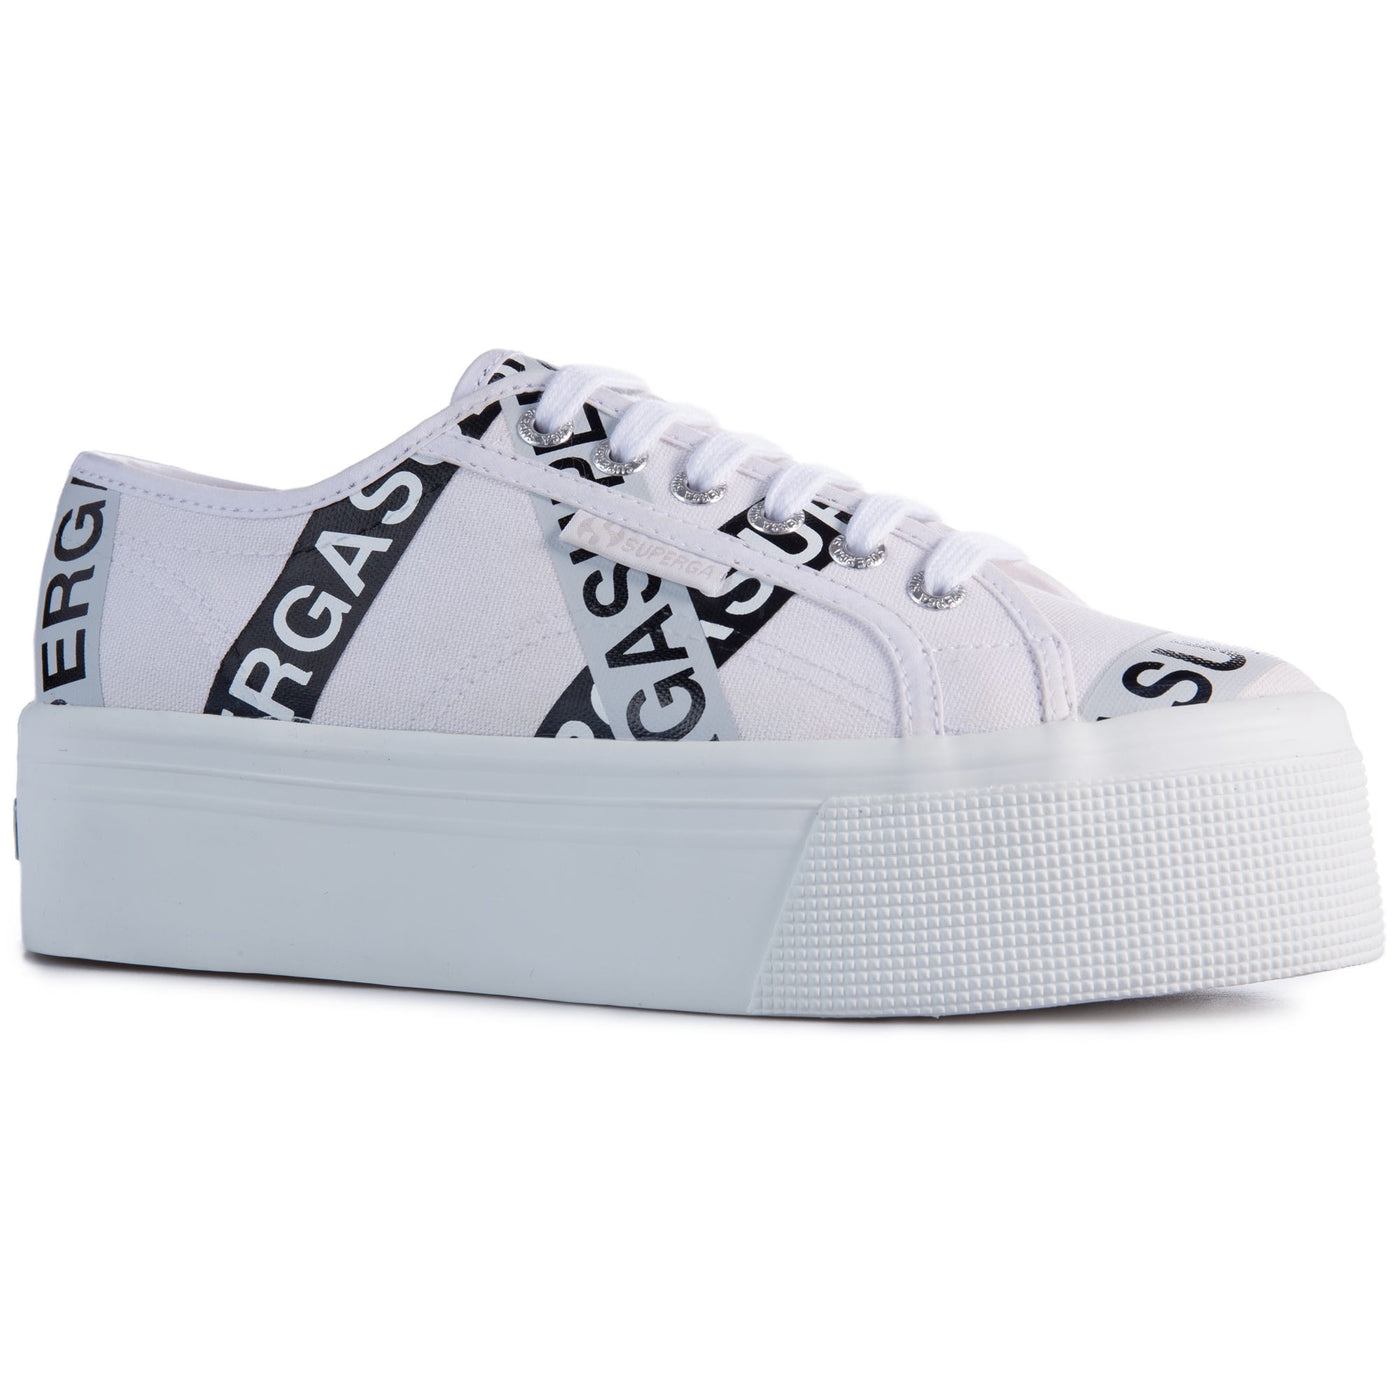 Lady Shoes Woman 2790 LETTERING TAPE JELLYSOLE Wedge WHITE GREY ASH-BLACK TAPE LT GREY SOLE Detail Double				